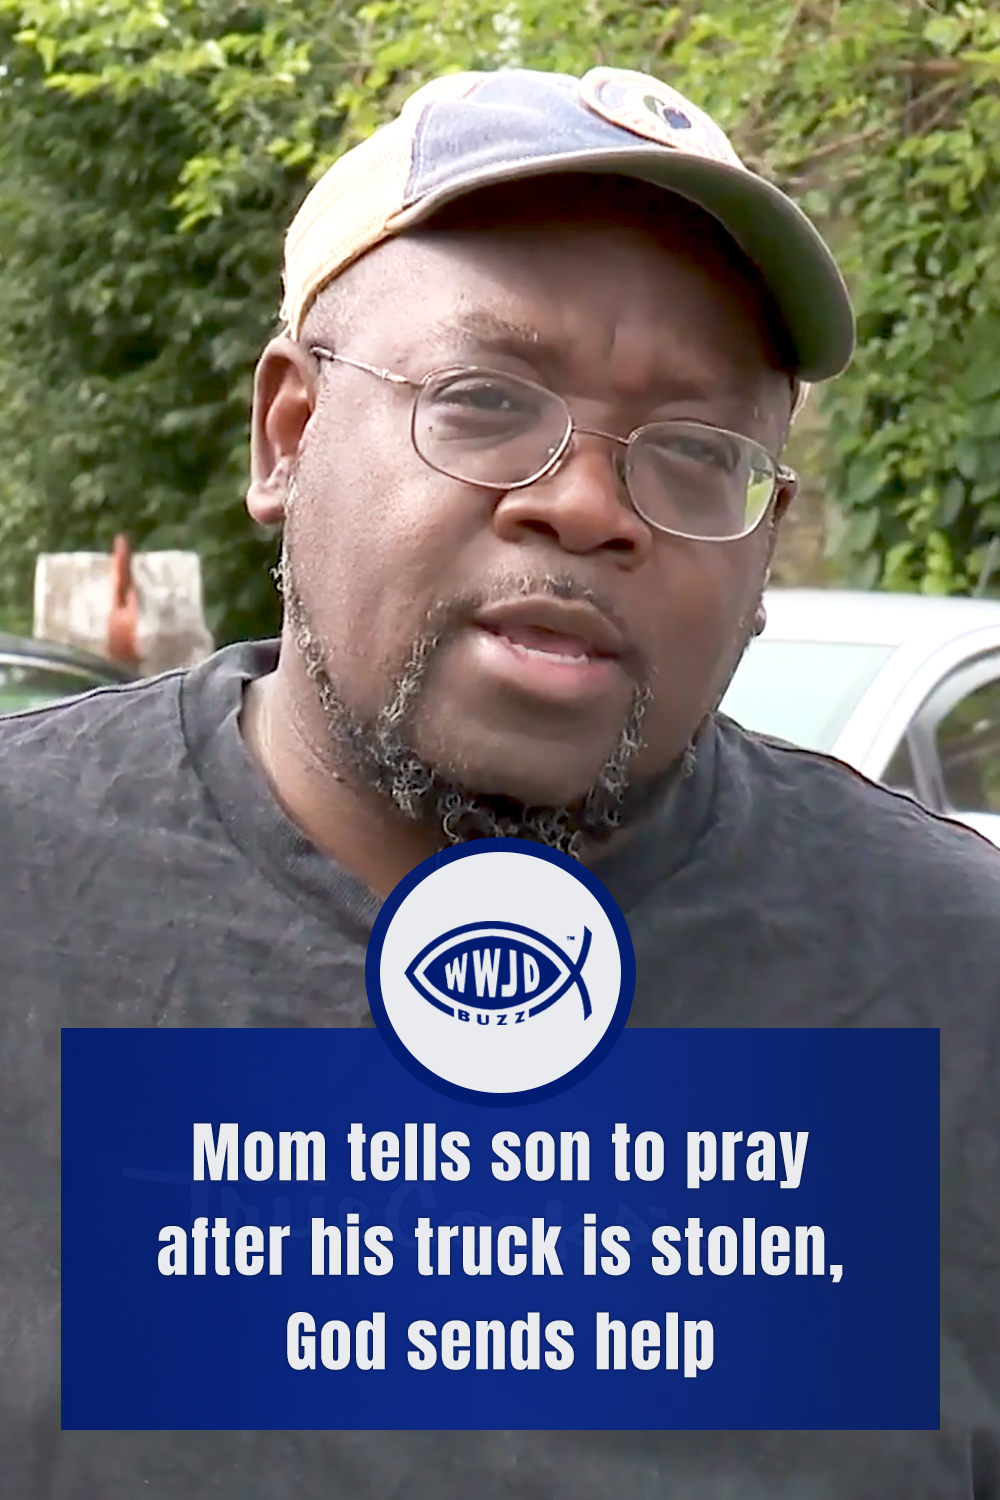 Mom tells son to pray after his truck is stolen, God sends help